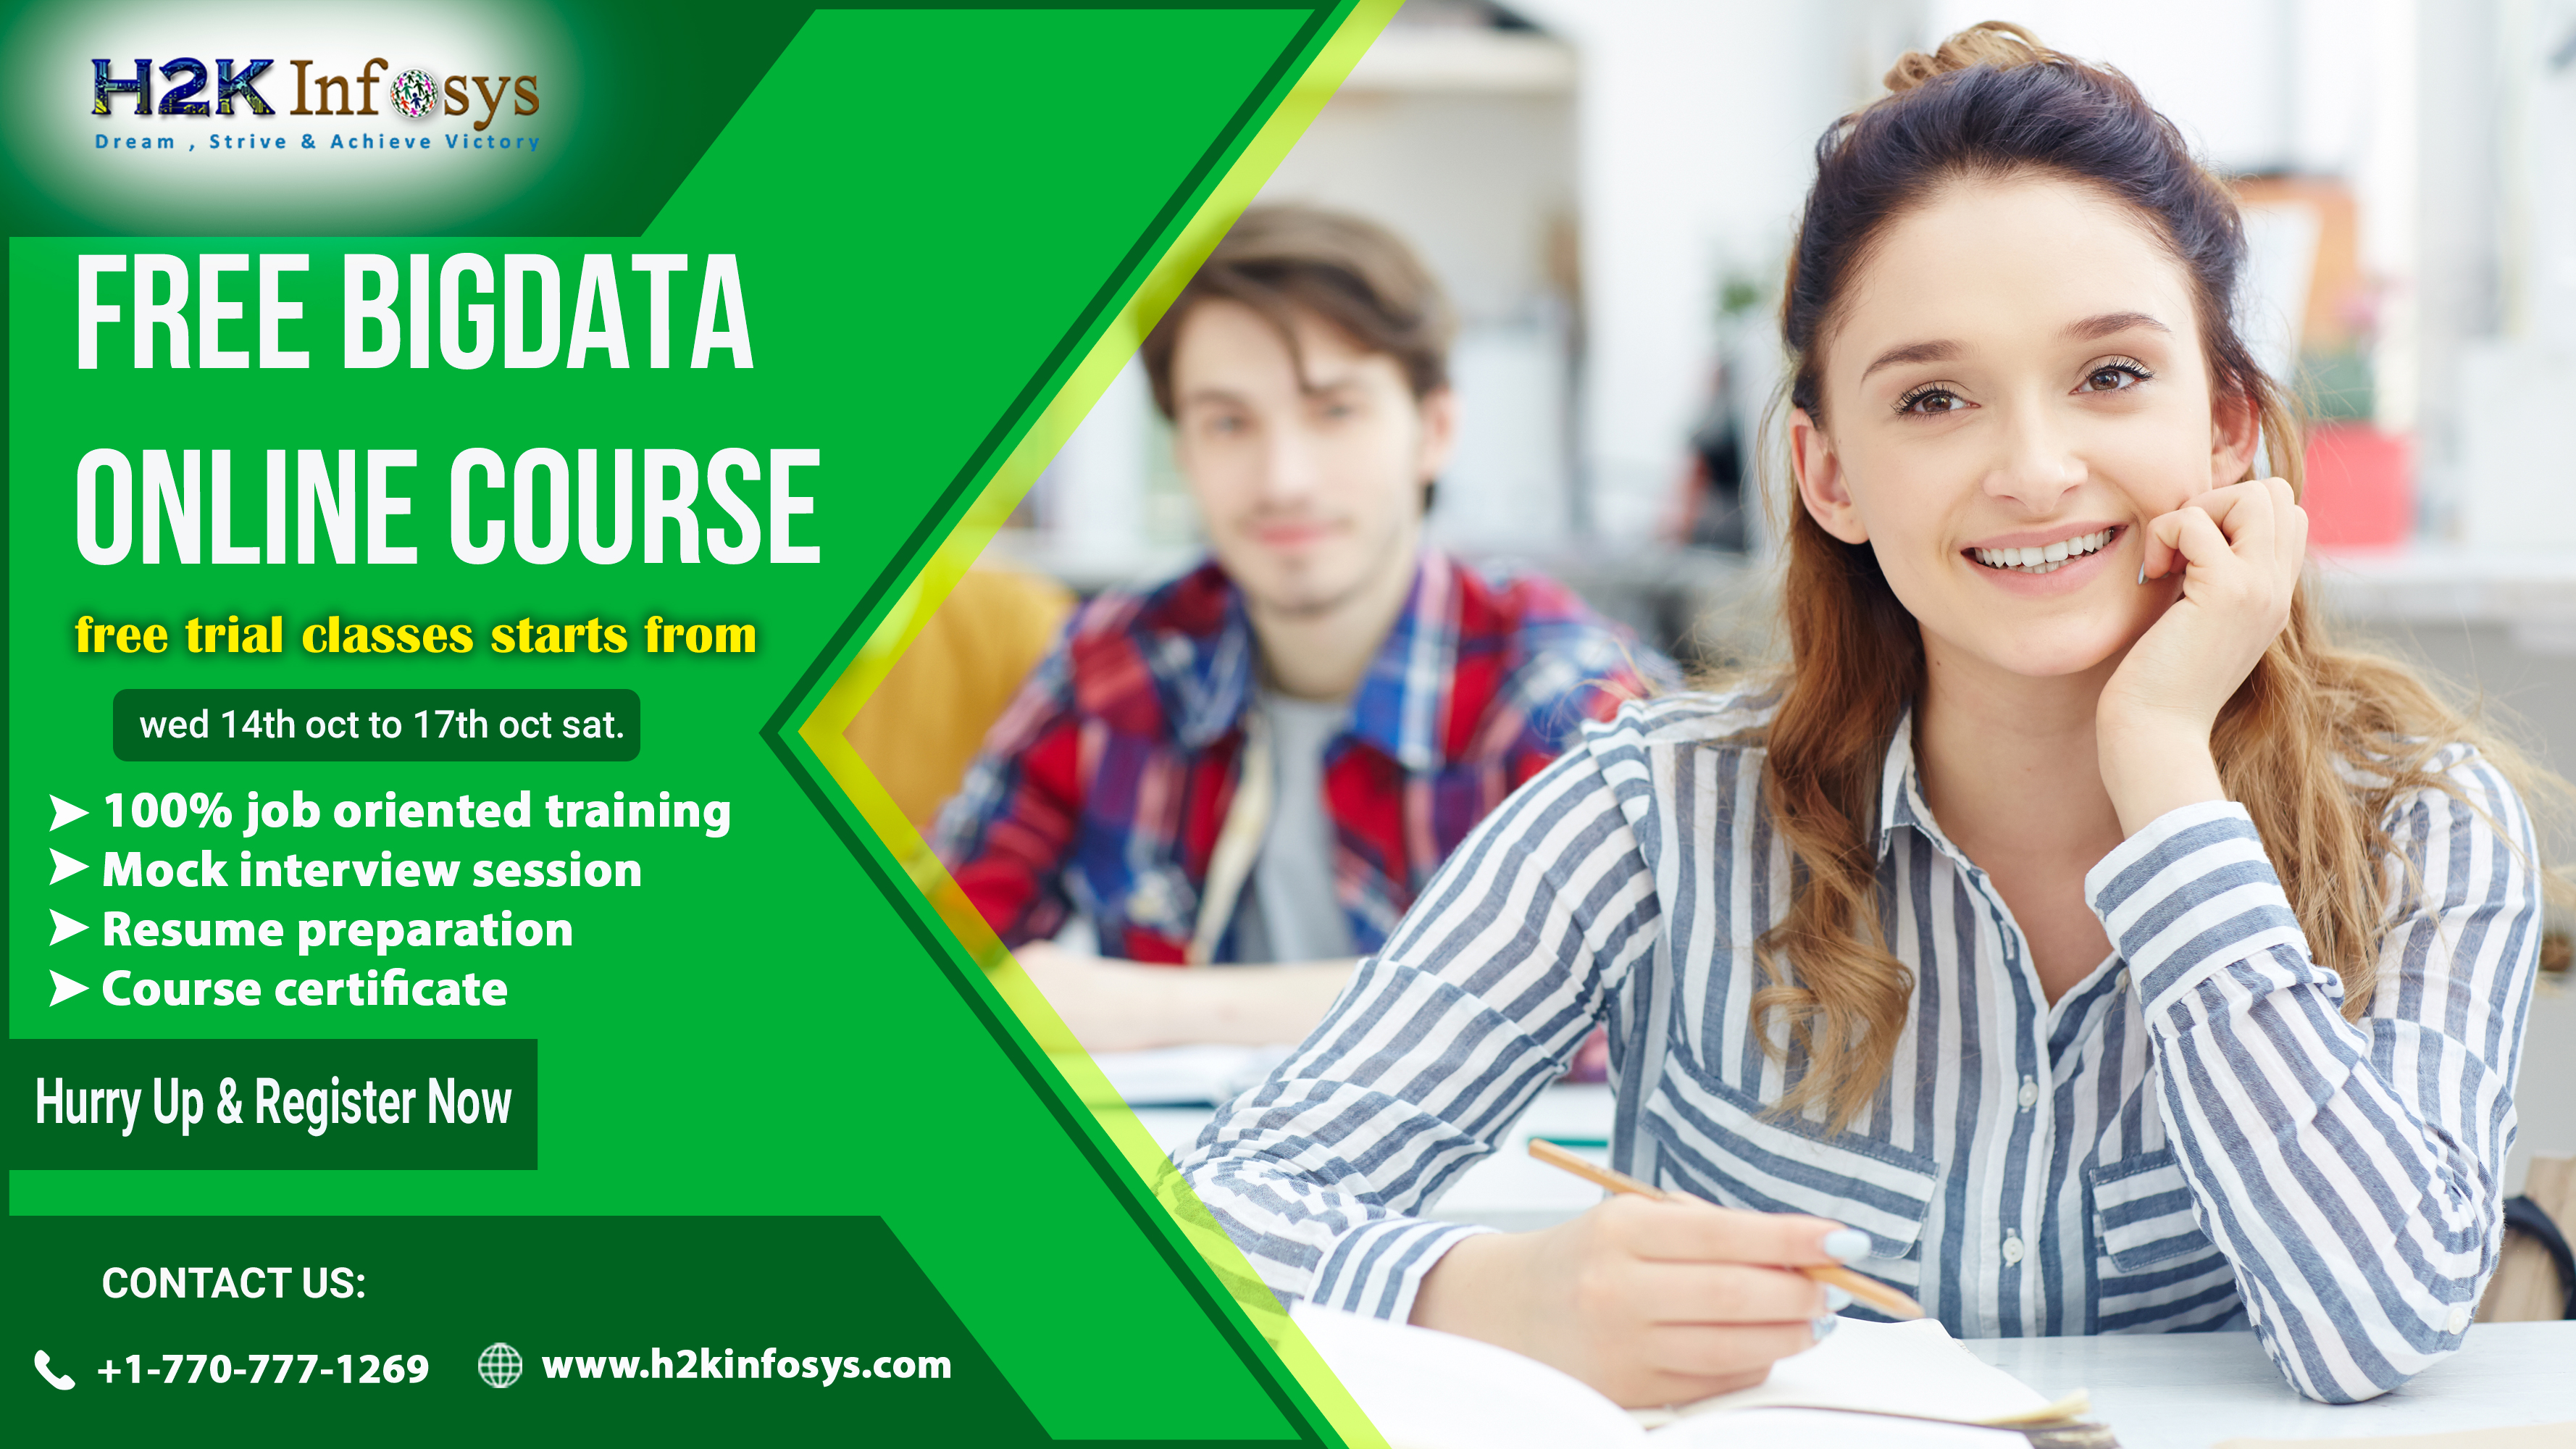 Register Now For BigData Free Trail Classes